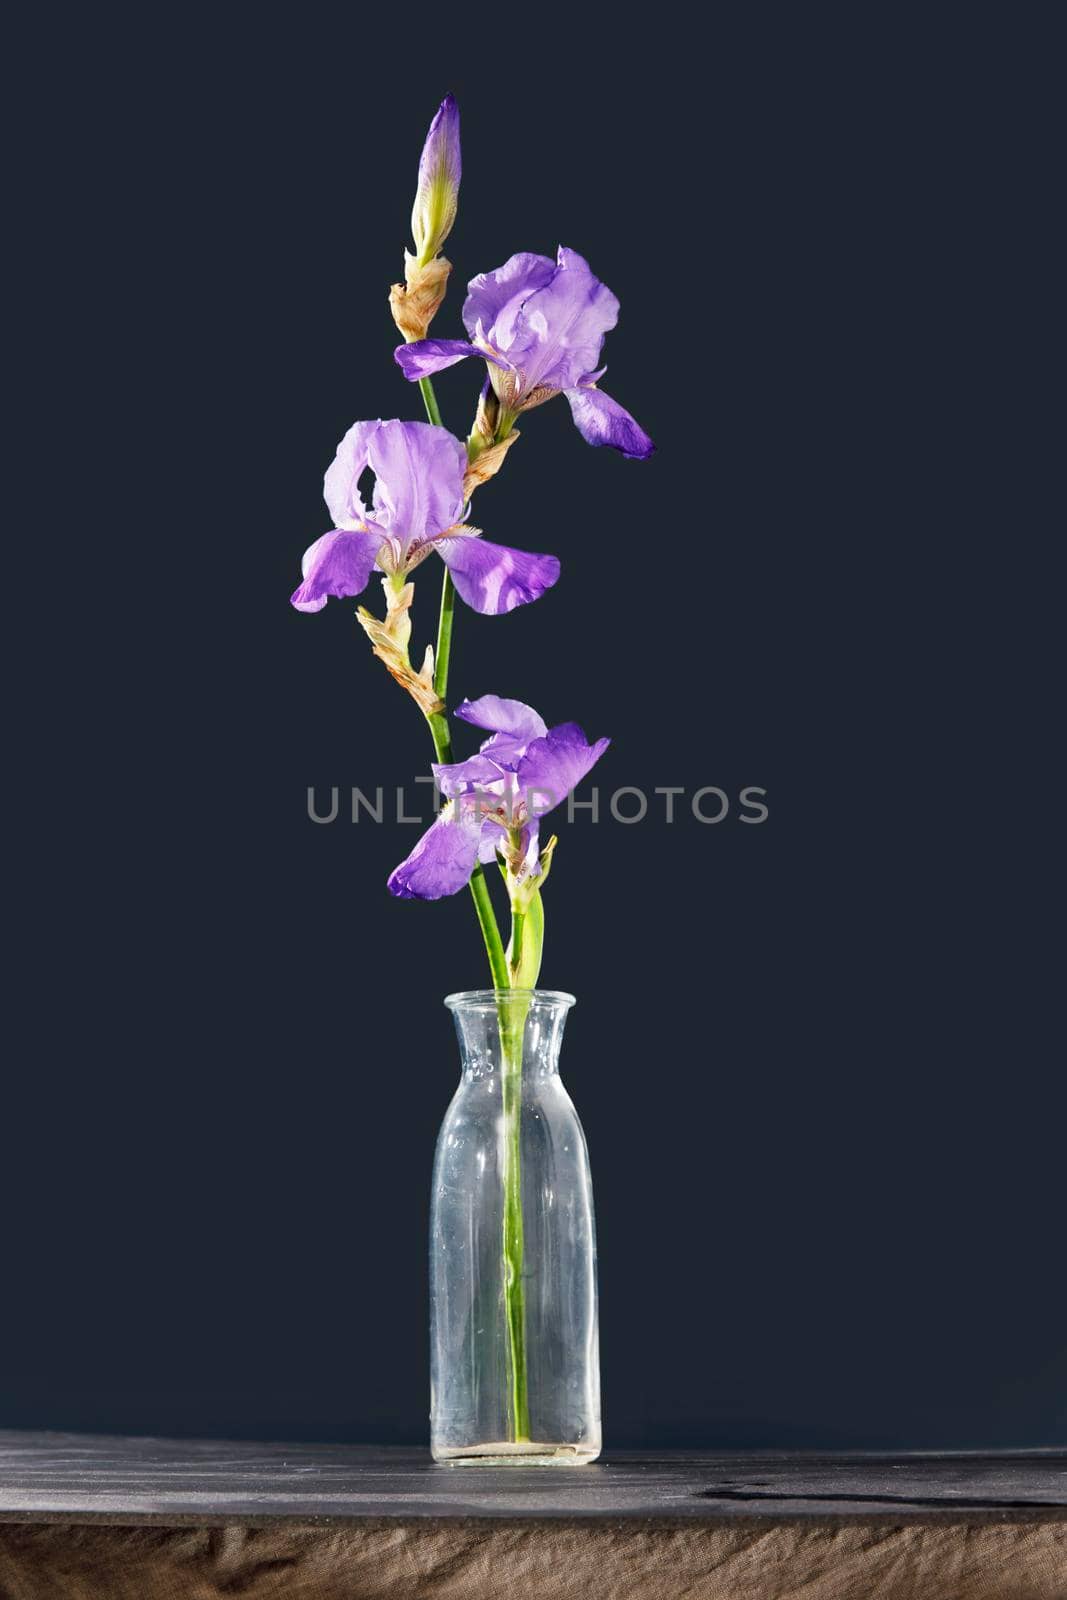 Blue iris flower on a black background. Place for your text. Layout.